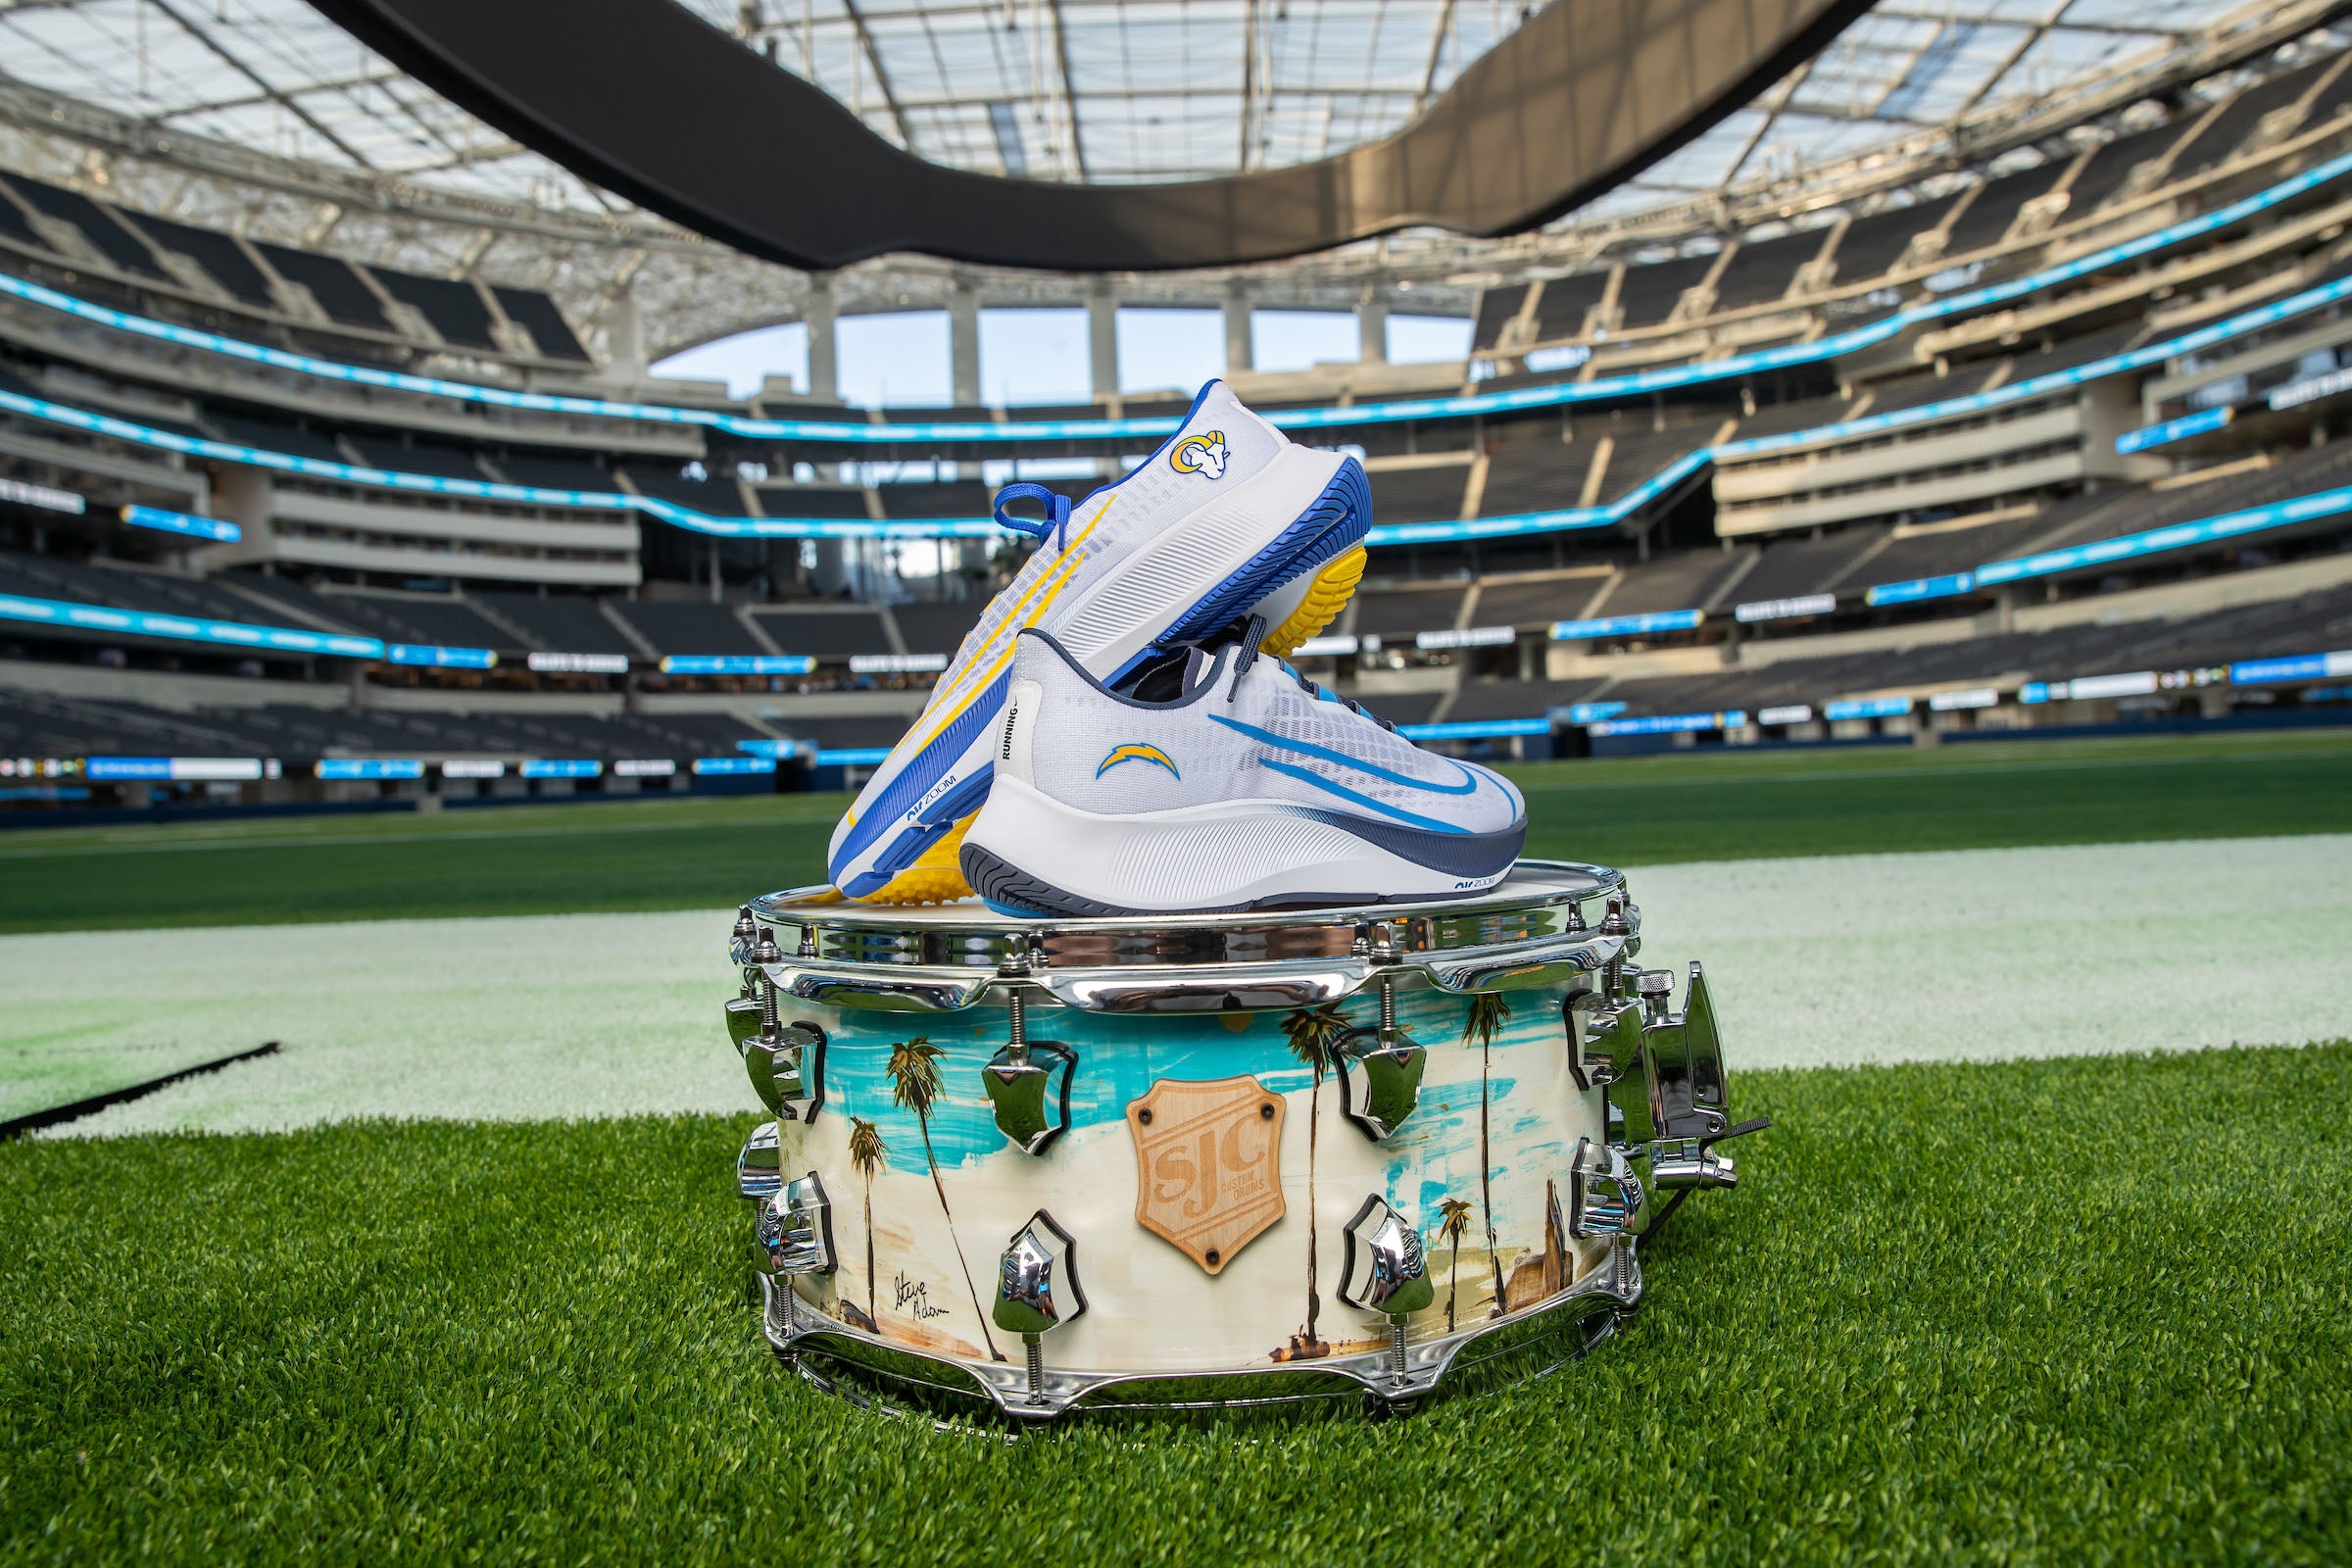 Commemorative Snare Drums